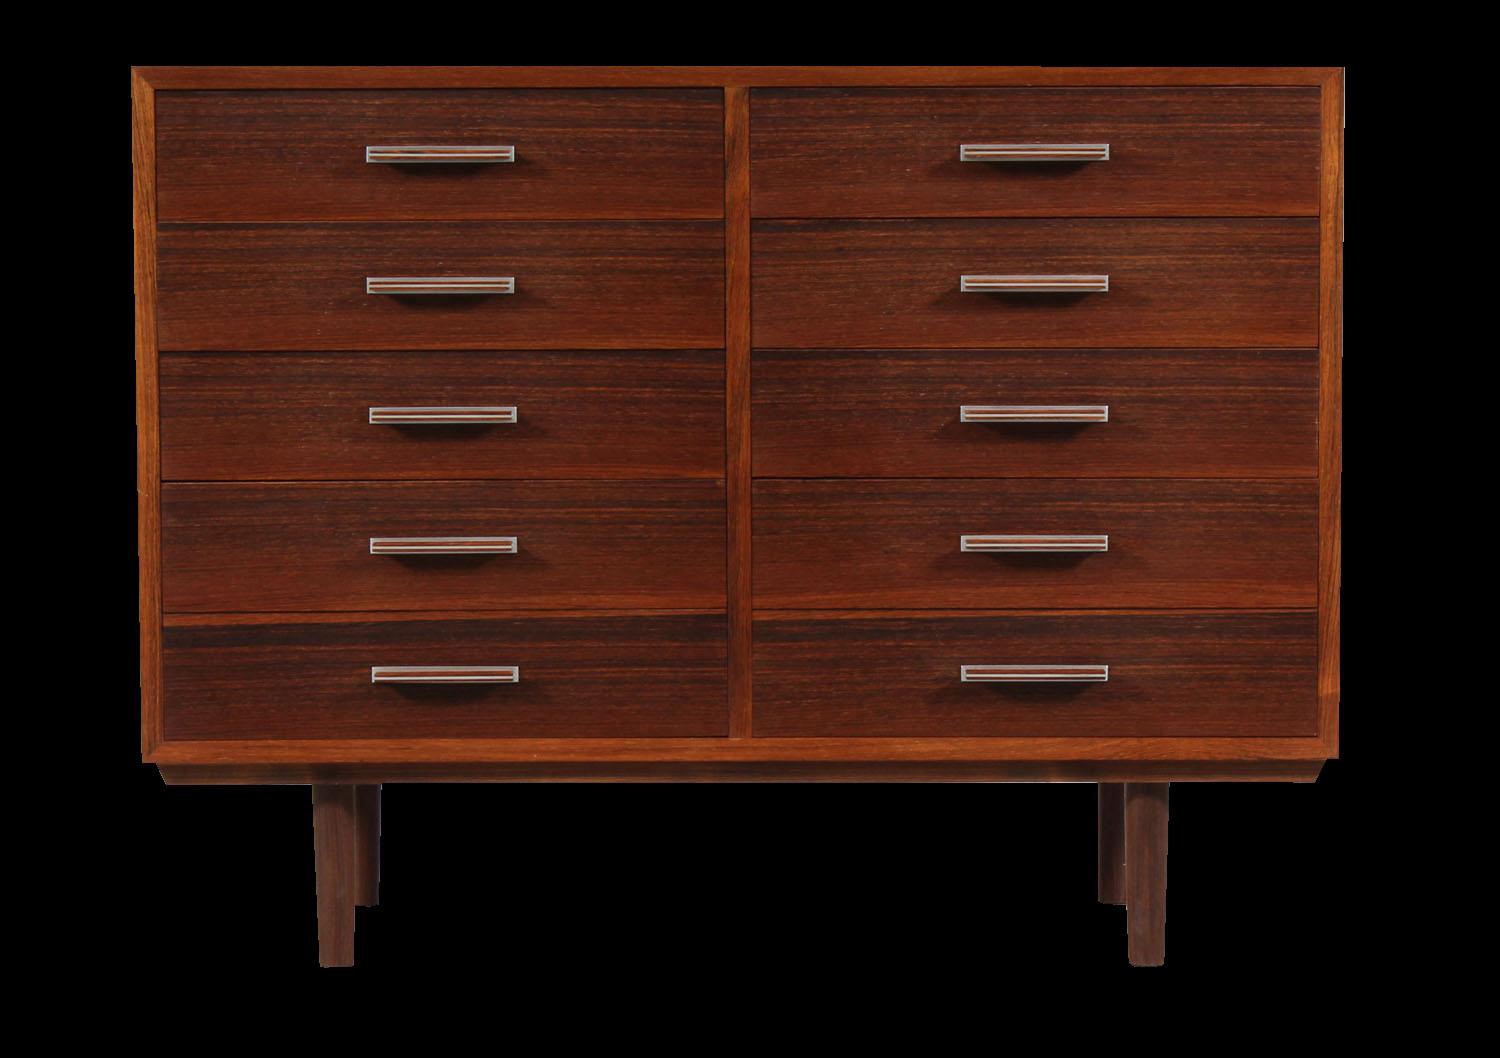 Danish Rosewood Chest of 8 Drawers by Axel Christiansen for ACD Mobler